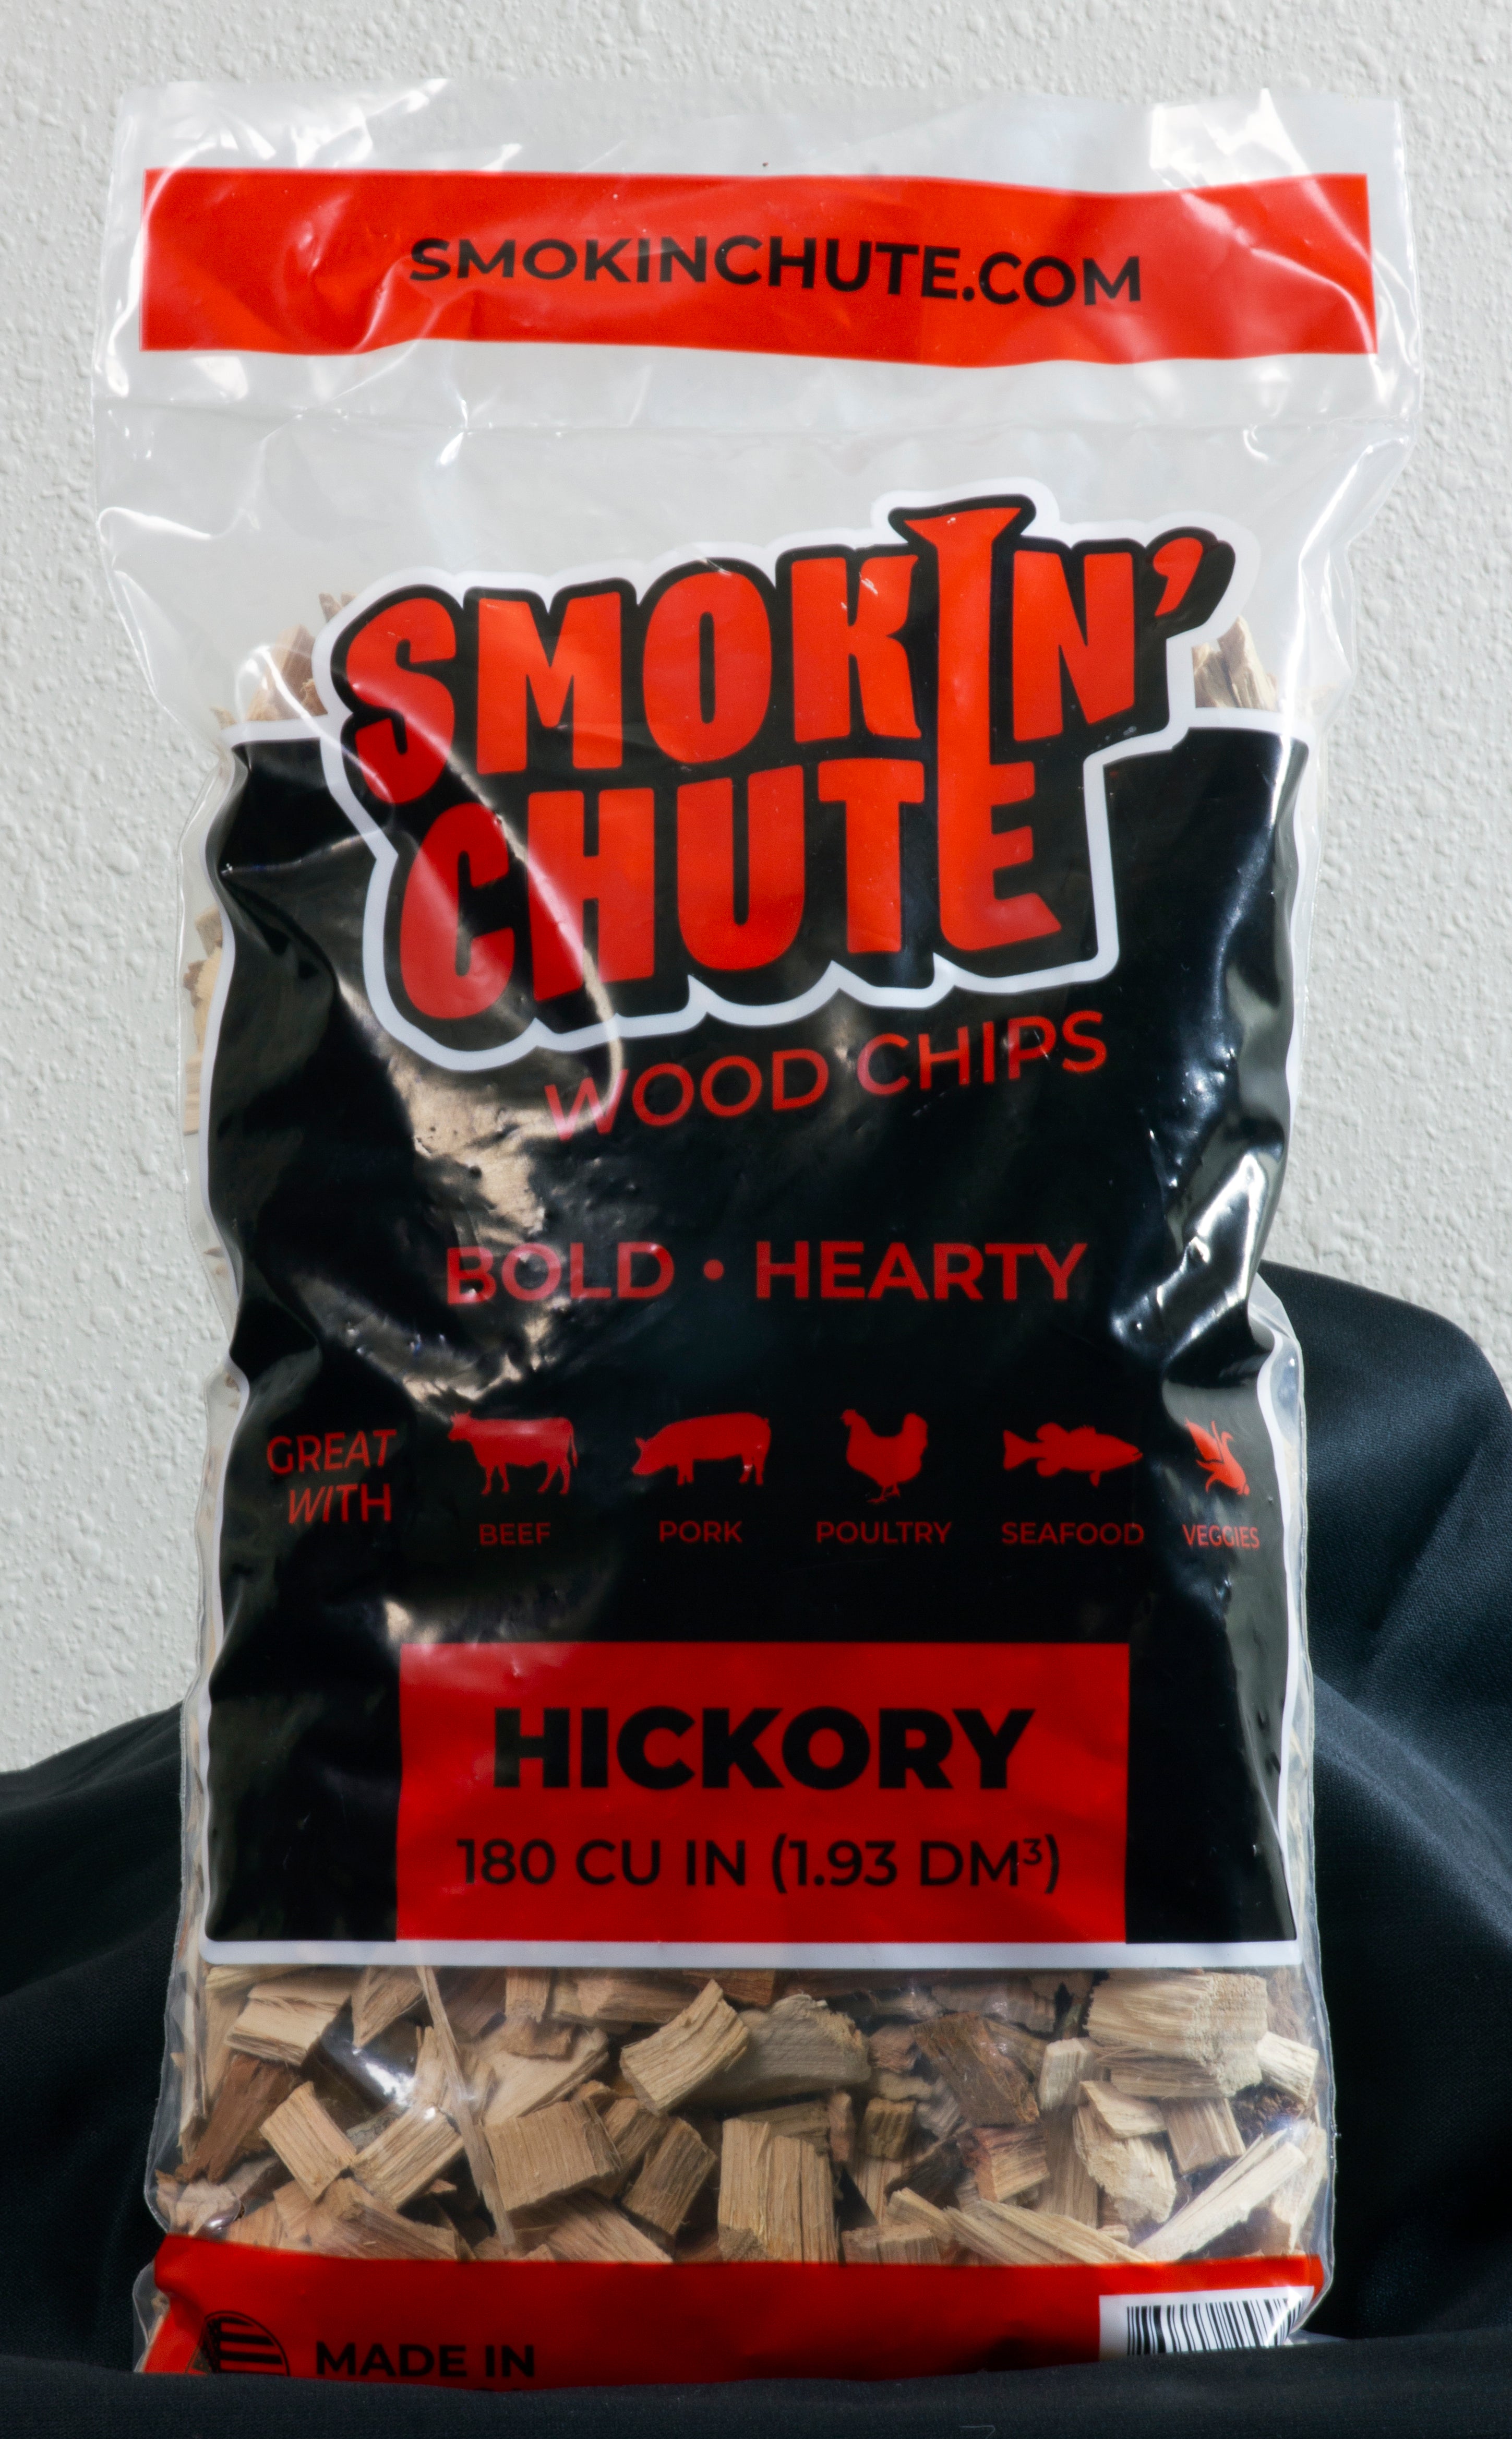 Smokin' Chute + Grate + 6 Bags of Wood Chips - 10% Discount + FREE